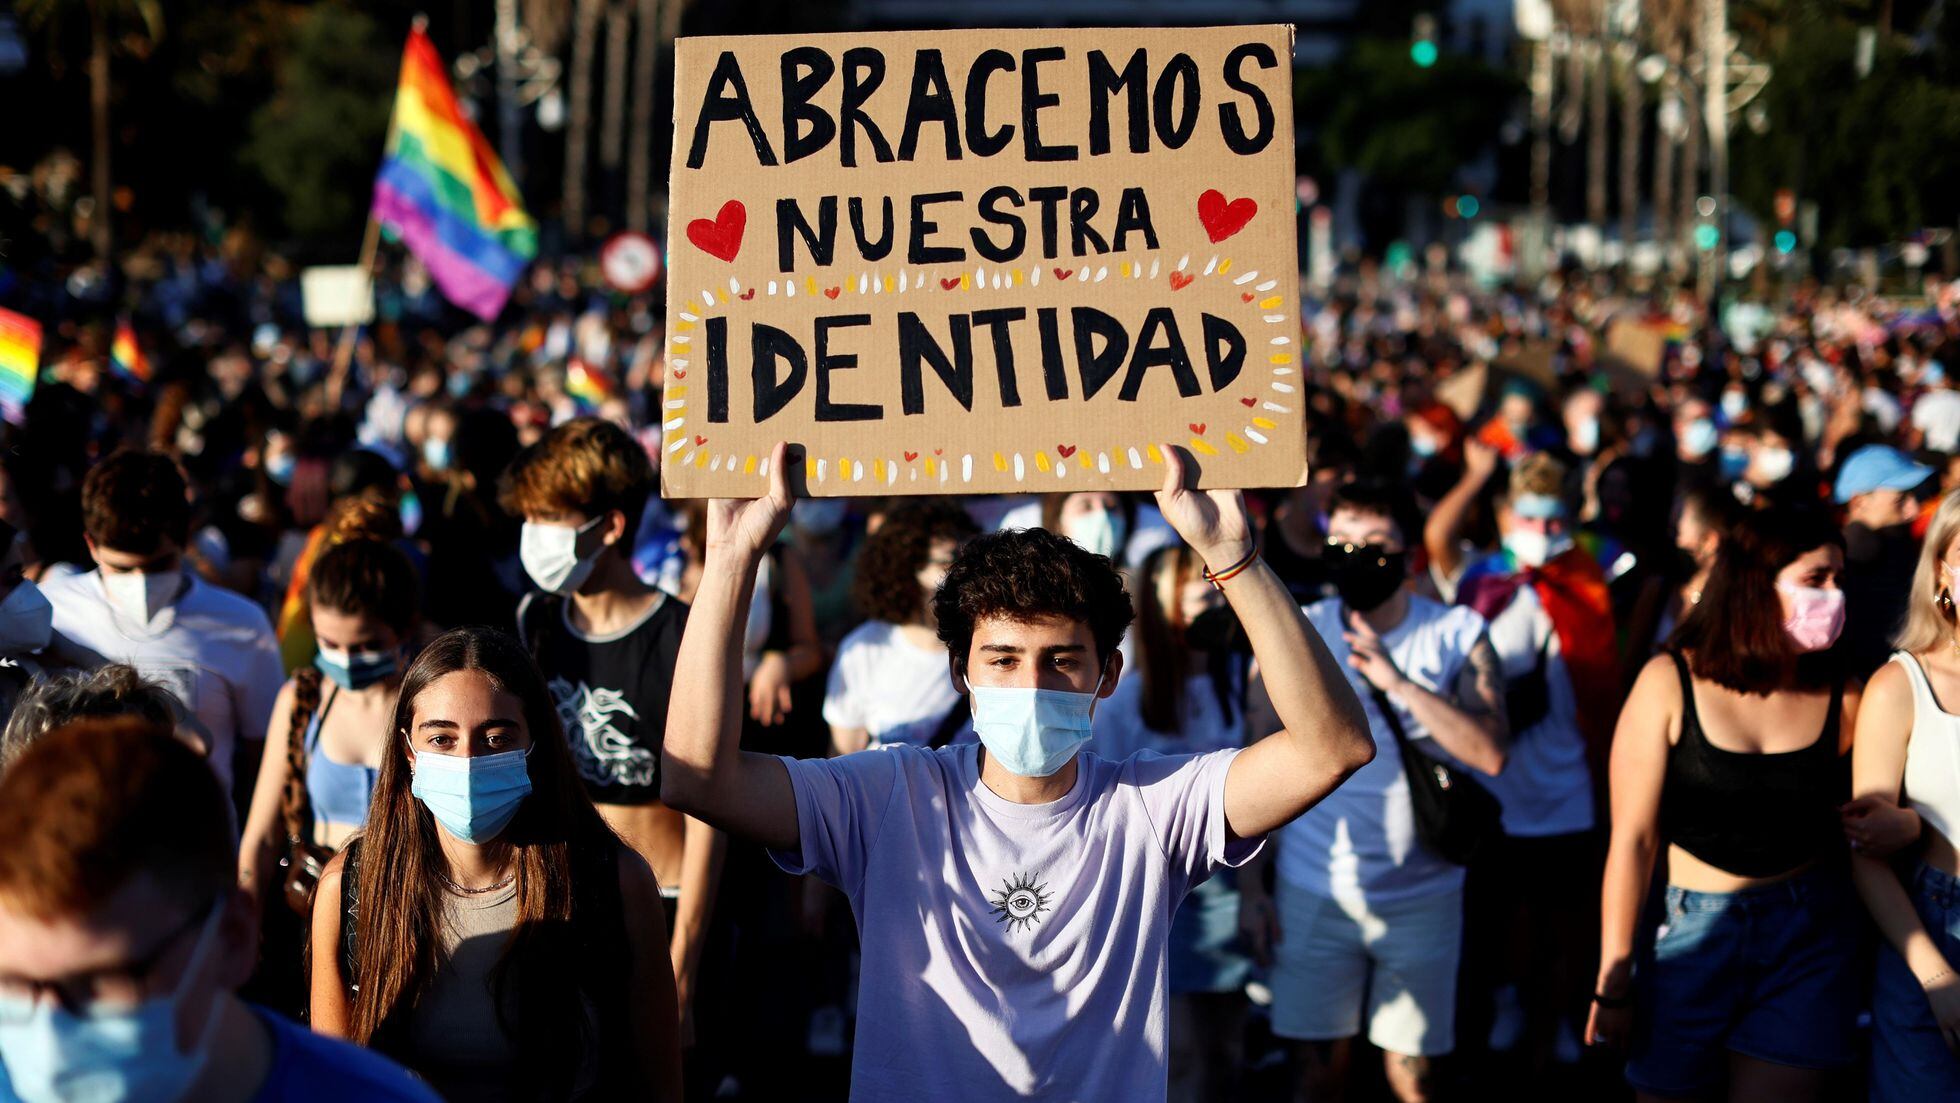 Trans law: Spain takes 'giant step' towards gender self-identification | Spain | EL PAÍS English Edition